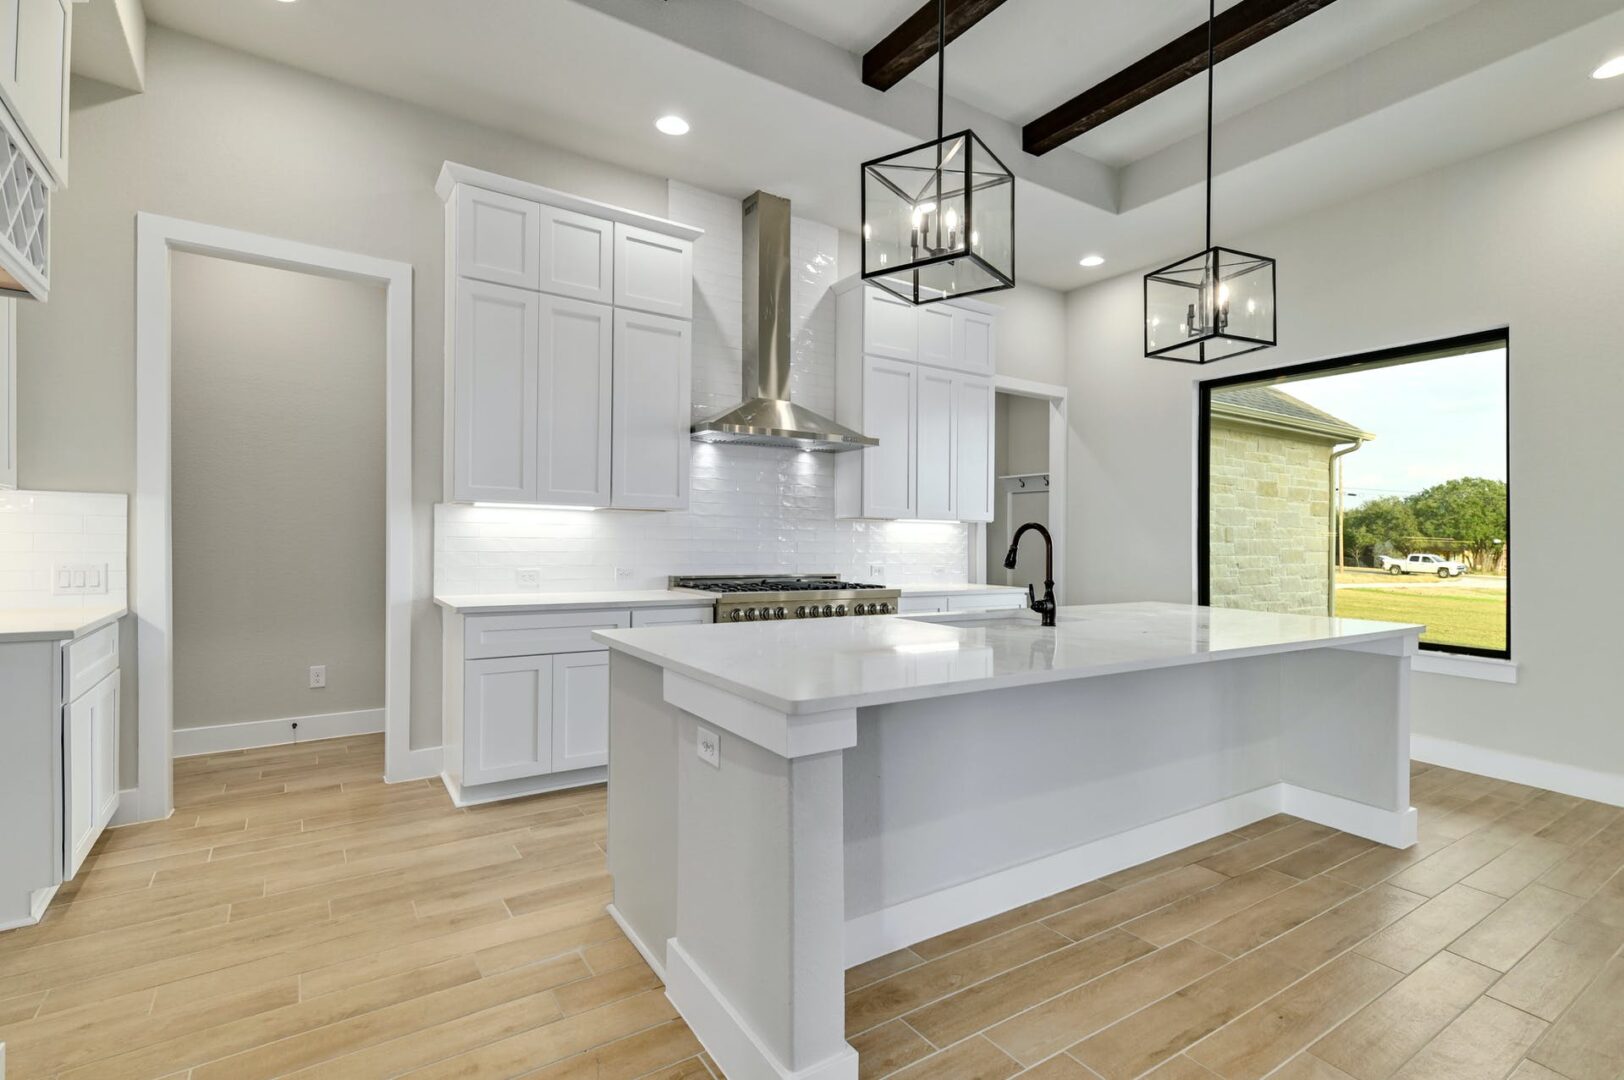 A white kitchen with wood floors and a center island.